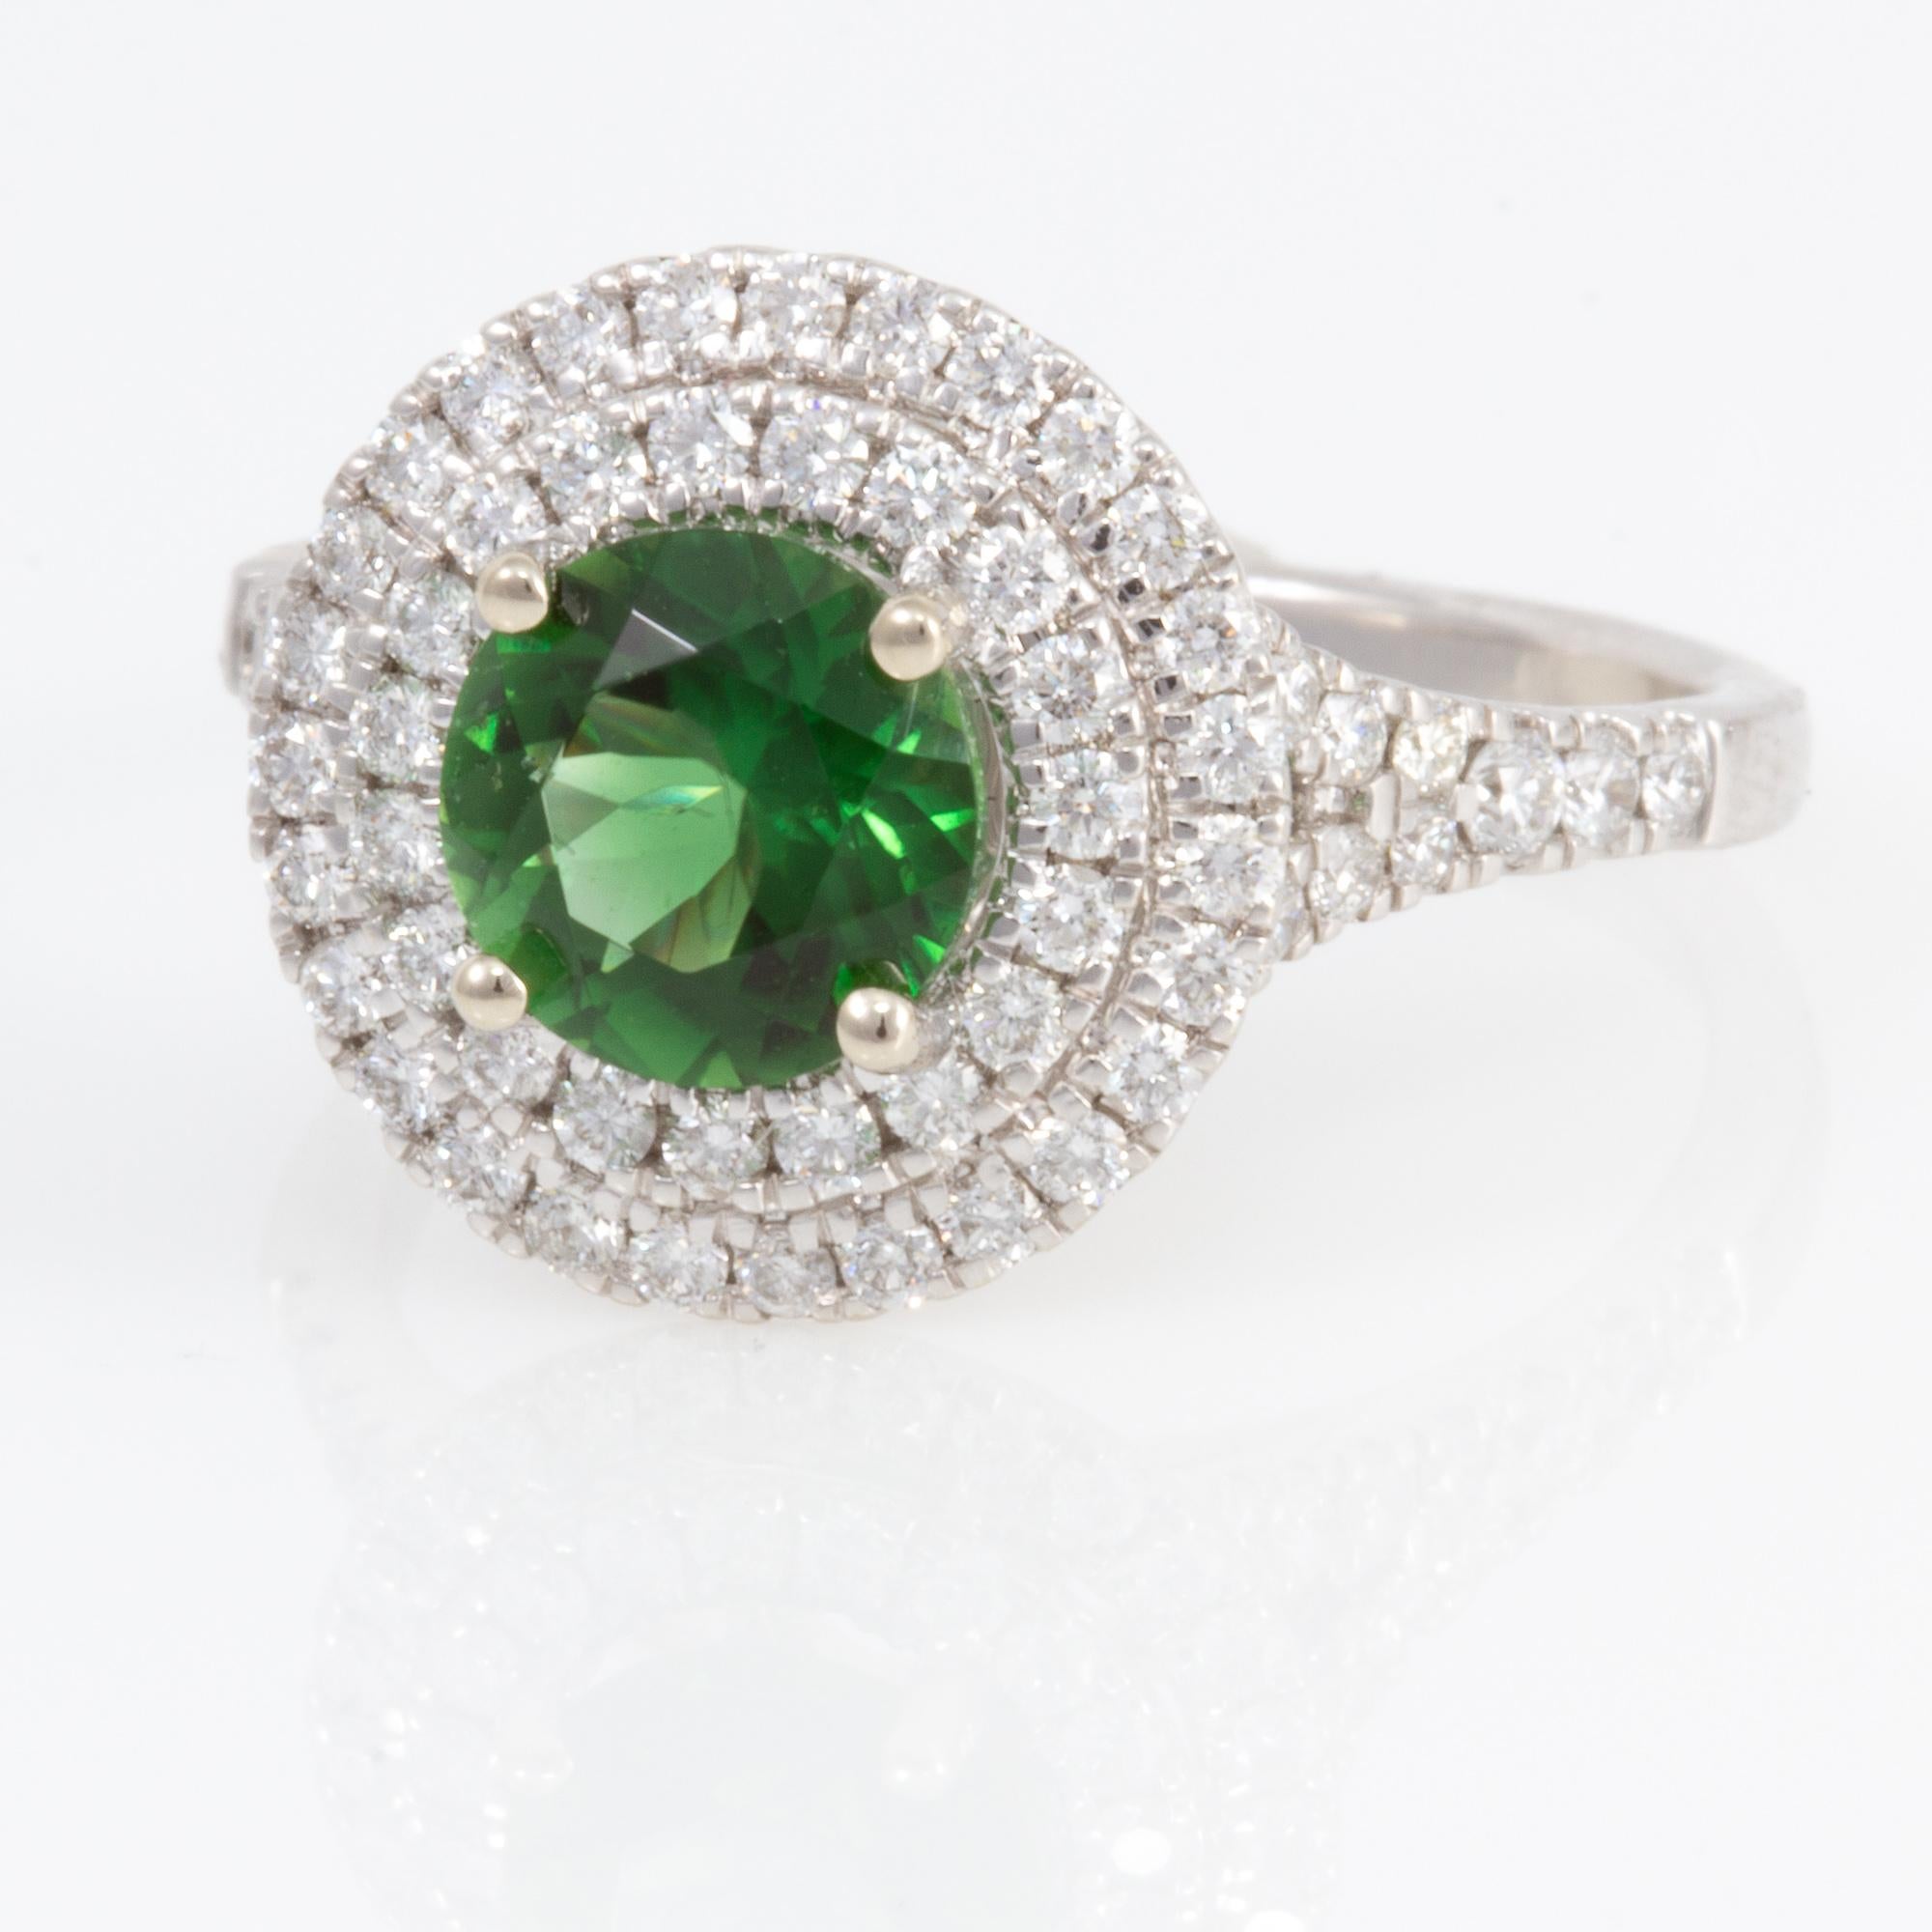 Exceptionally Well Cut 1.26 Carat Chrome Tourmaline and Diamond Ring In New Condition For Sale In Houston, TX